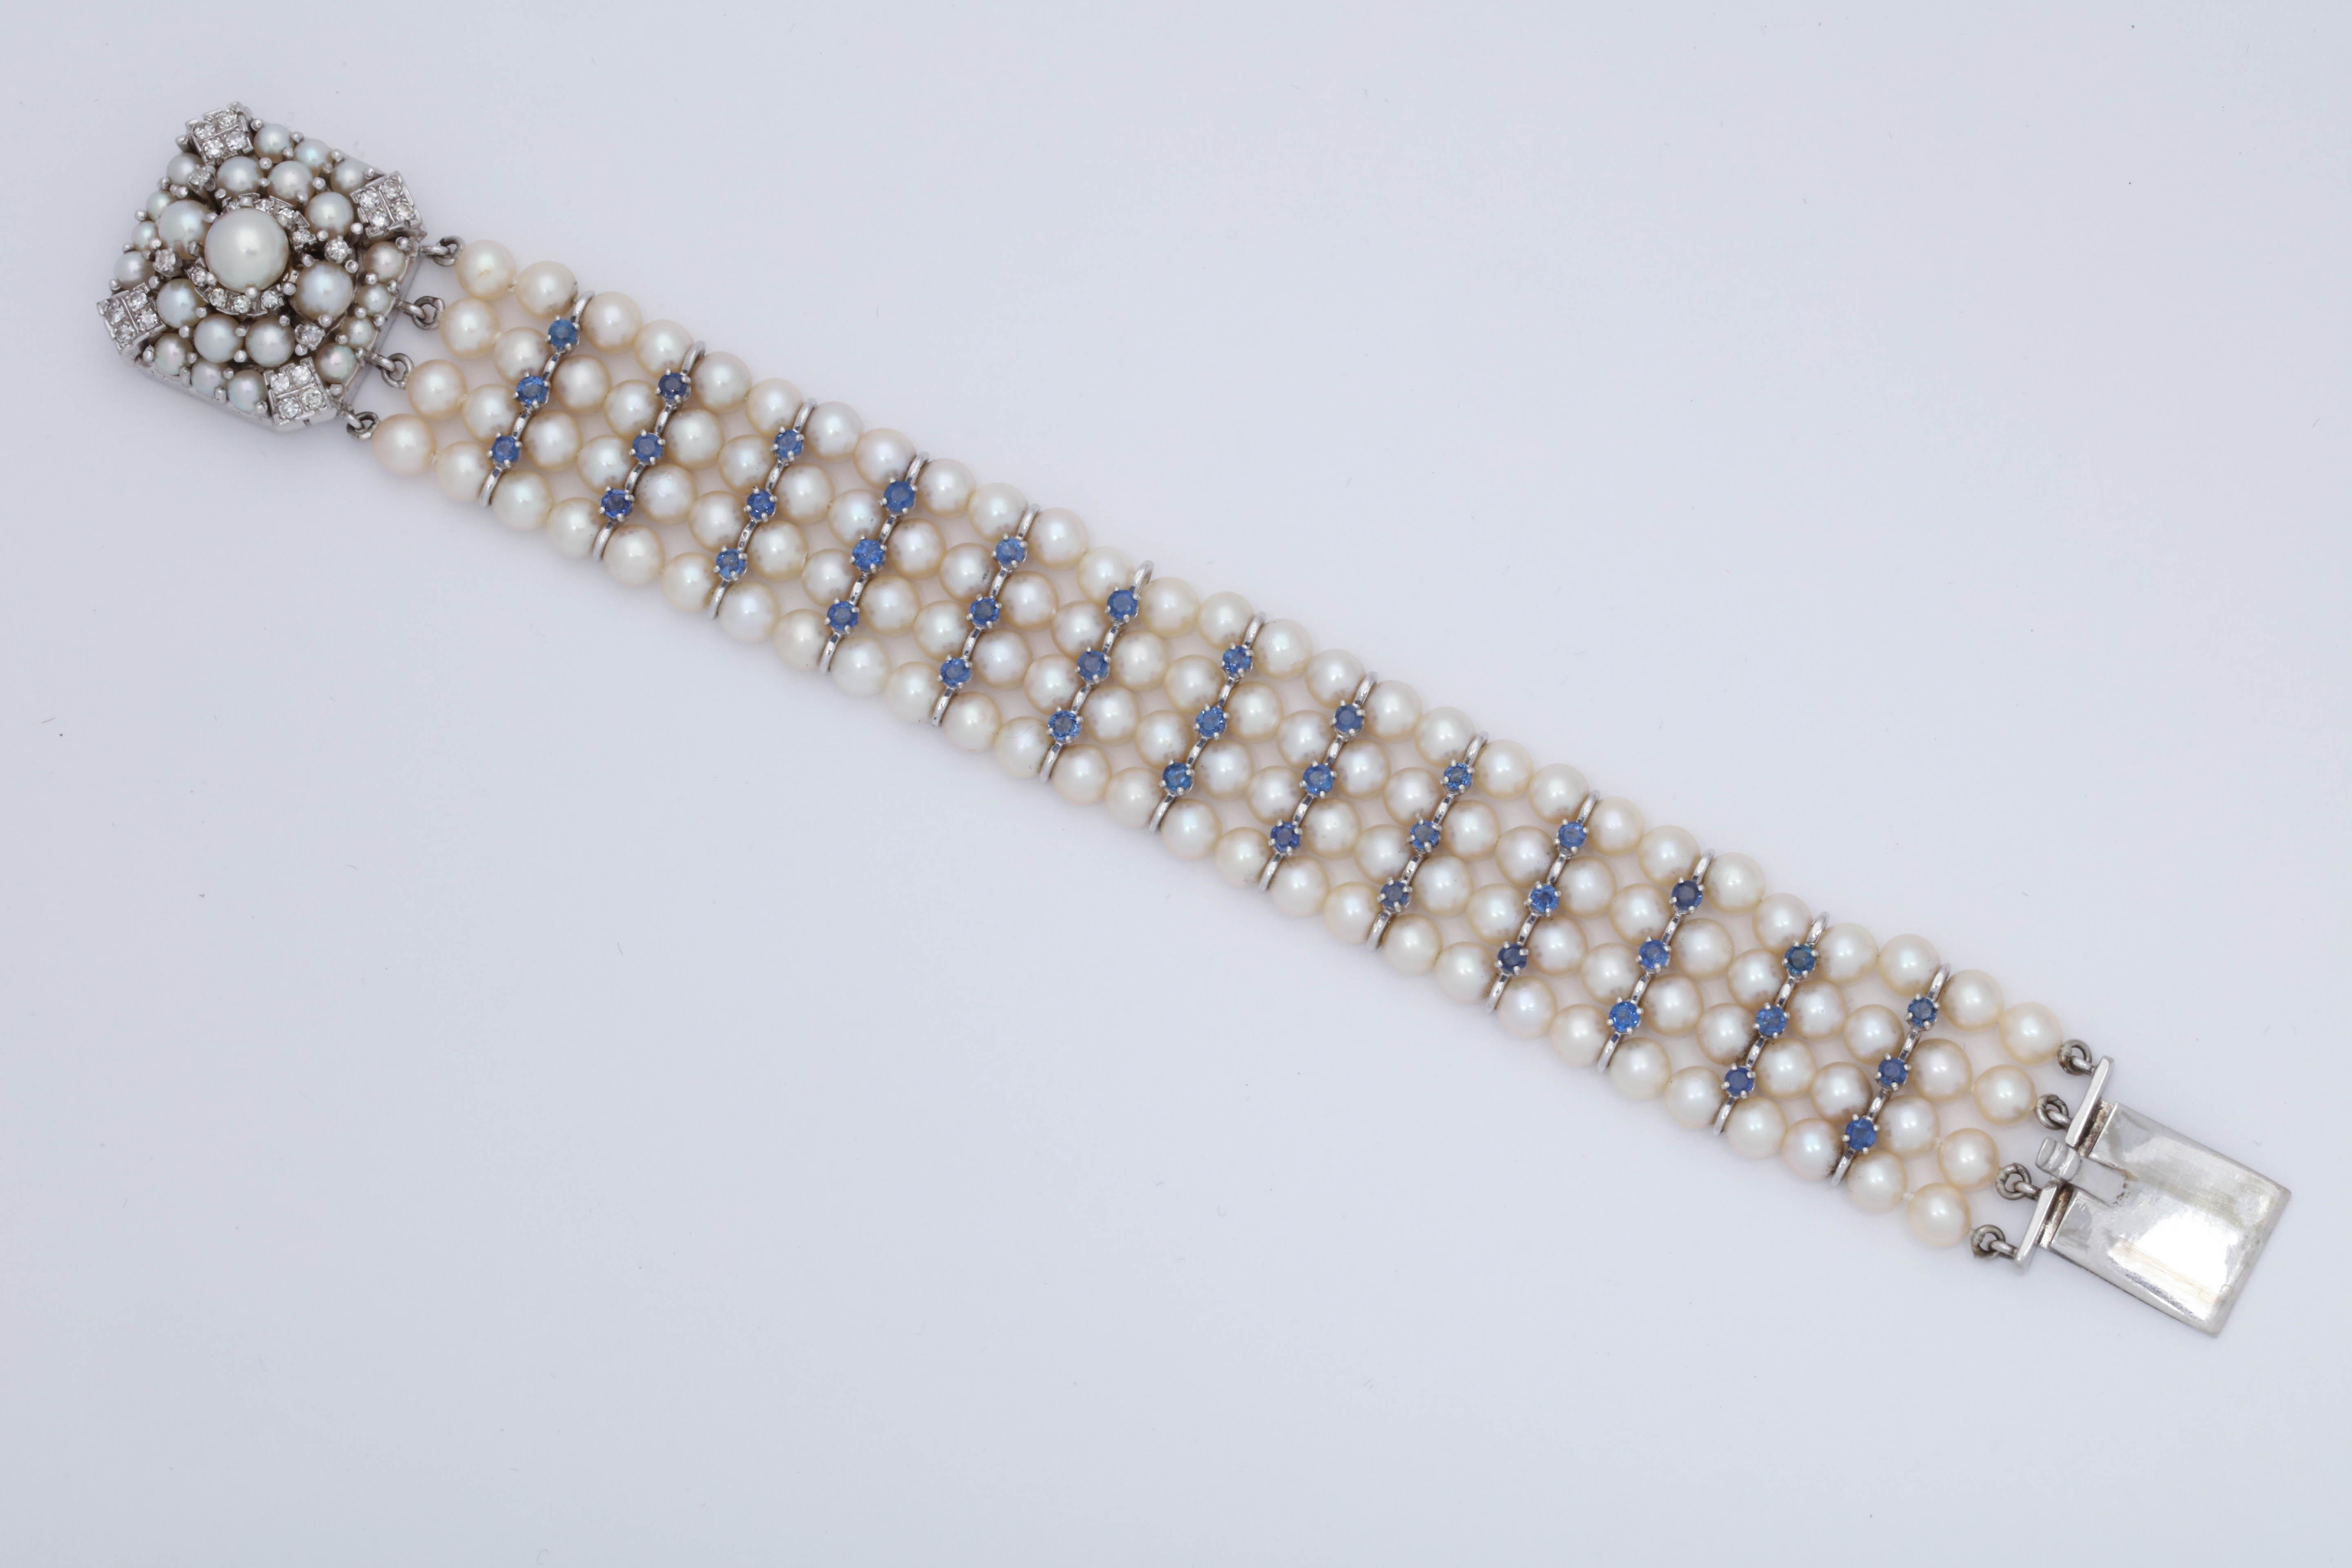 One Ladies Flexible 14kt White Gold Bracelet Embellished With Numerous 5Mm Cultured Pearls. Bracelet Also Designed With 39 Faceted Sapphires And With Numerous Diamonds On Clasp Weighing Approximately One Carat Total Weight. Created In The United